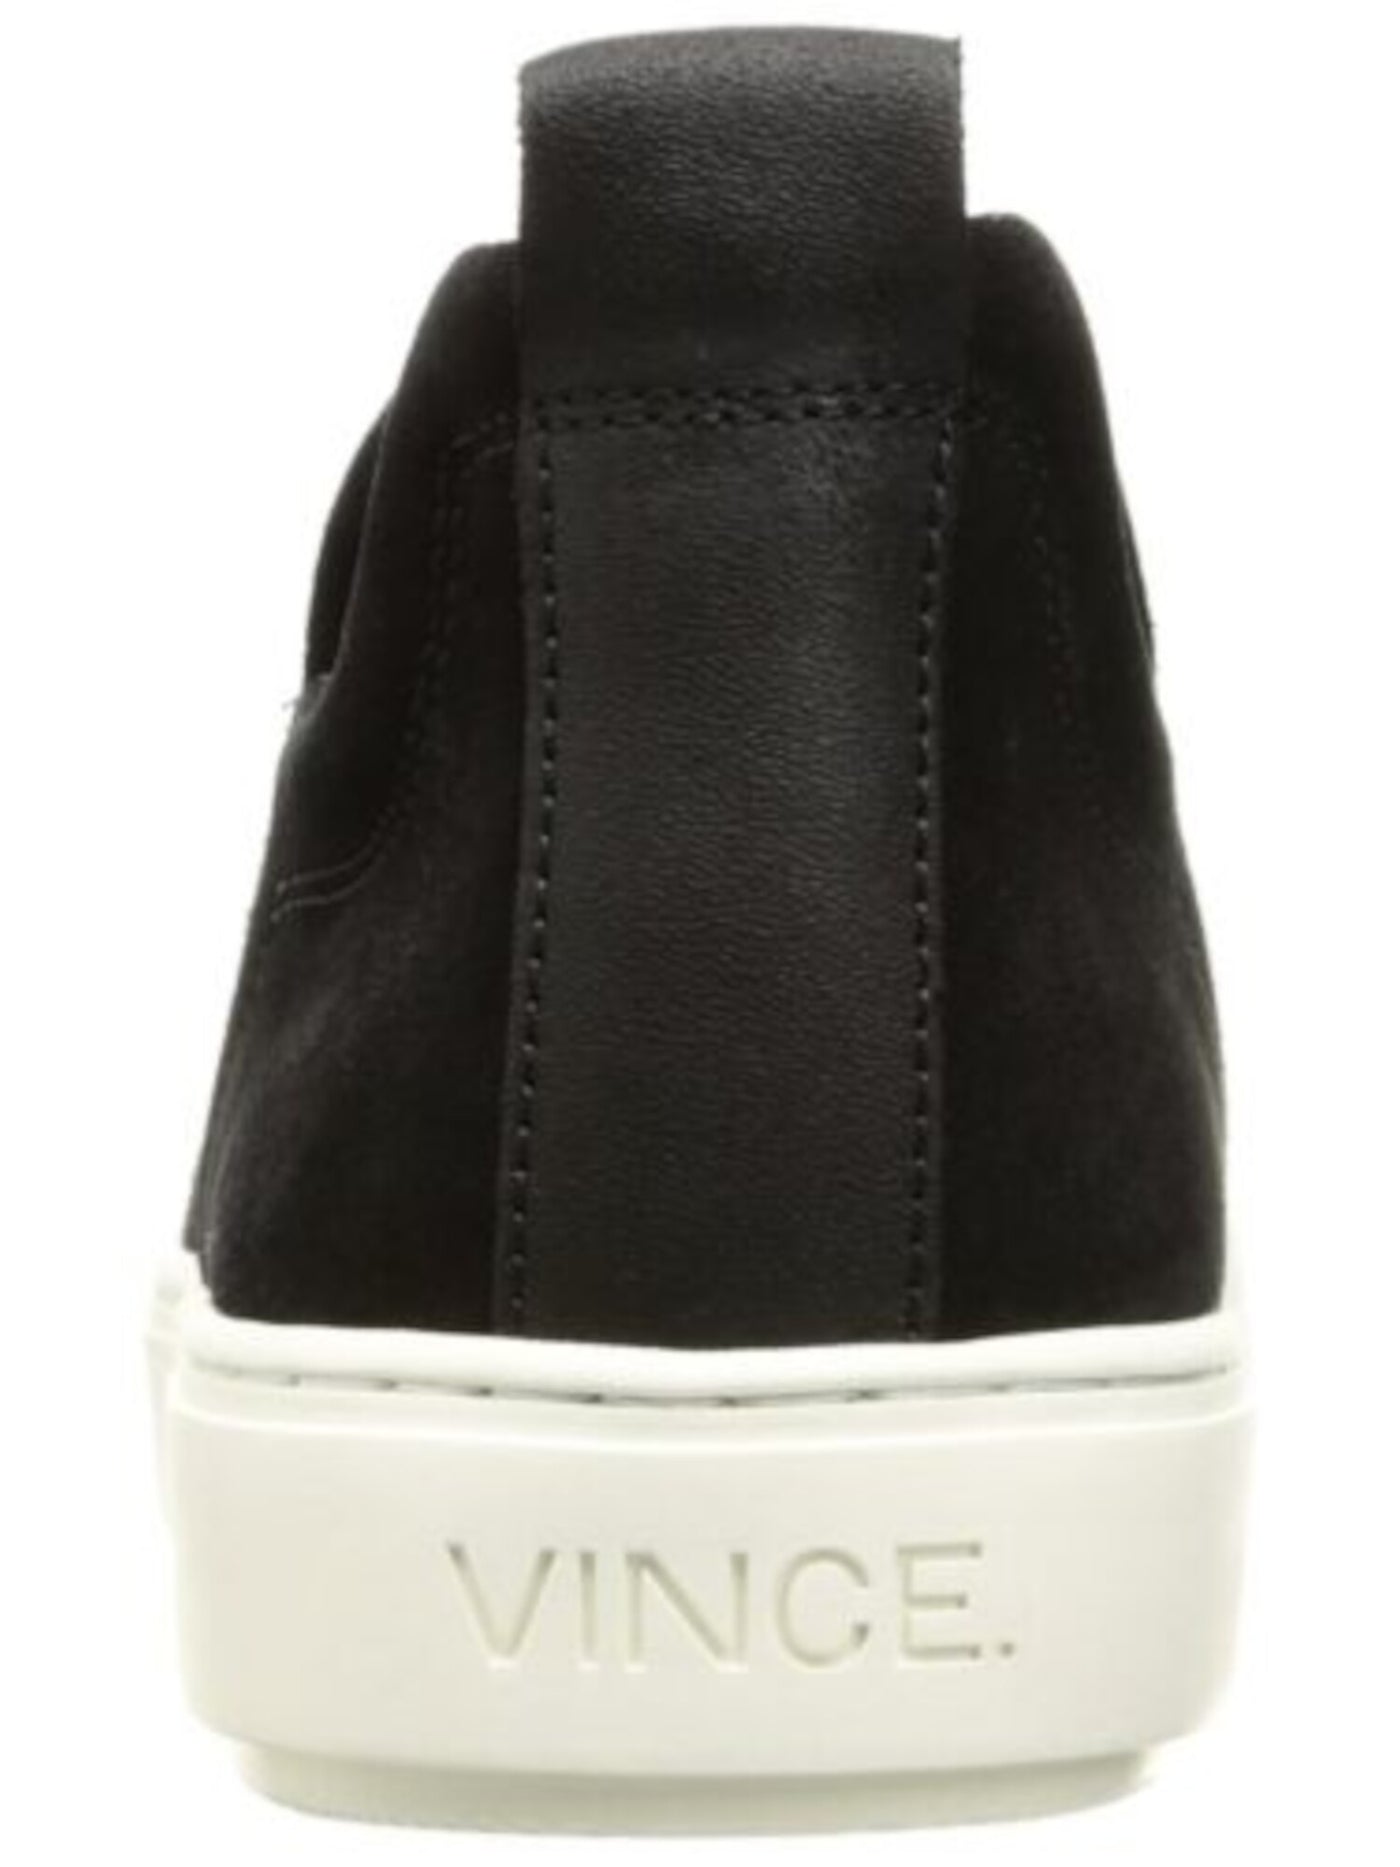 VINCE. Womens Black Elastic Gore Pull Tab Comfort Lucio Round Toe Platform Slip On Leather Athletic Sneakers Shoes 7 M